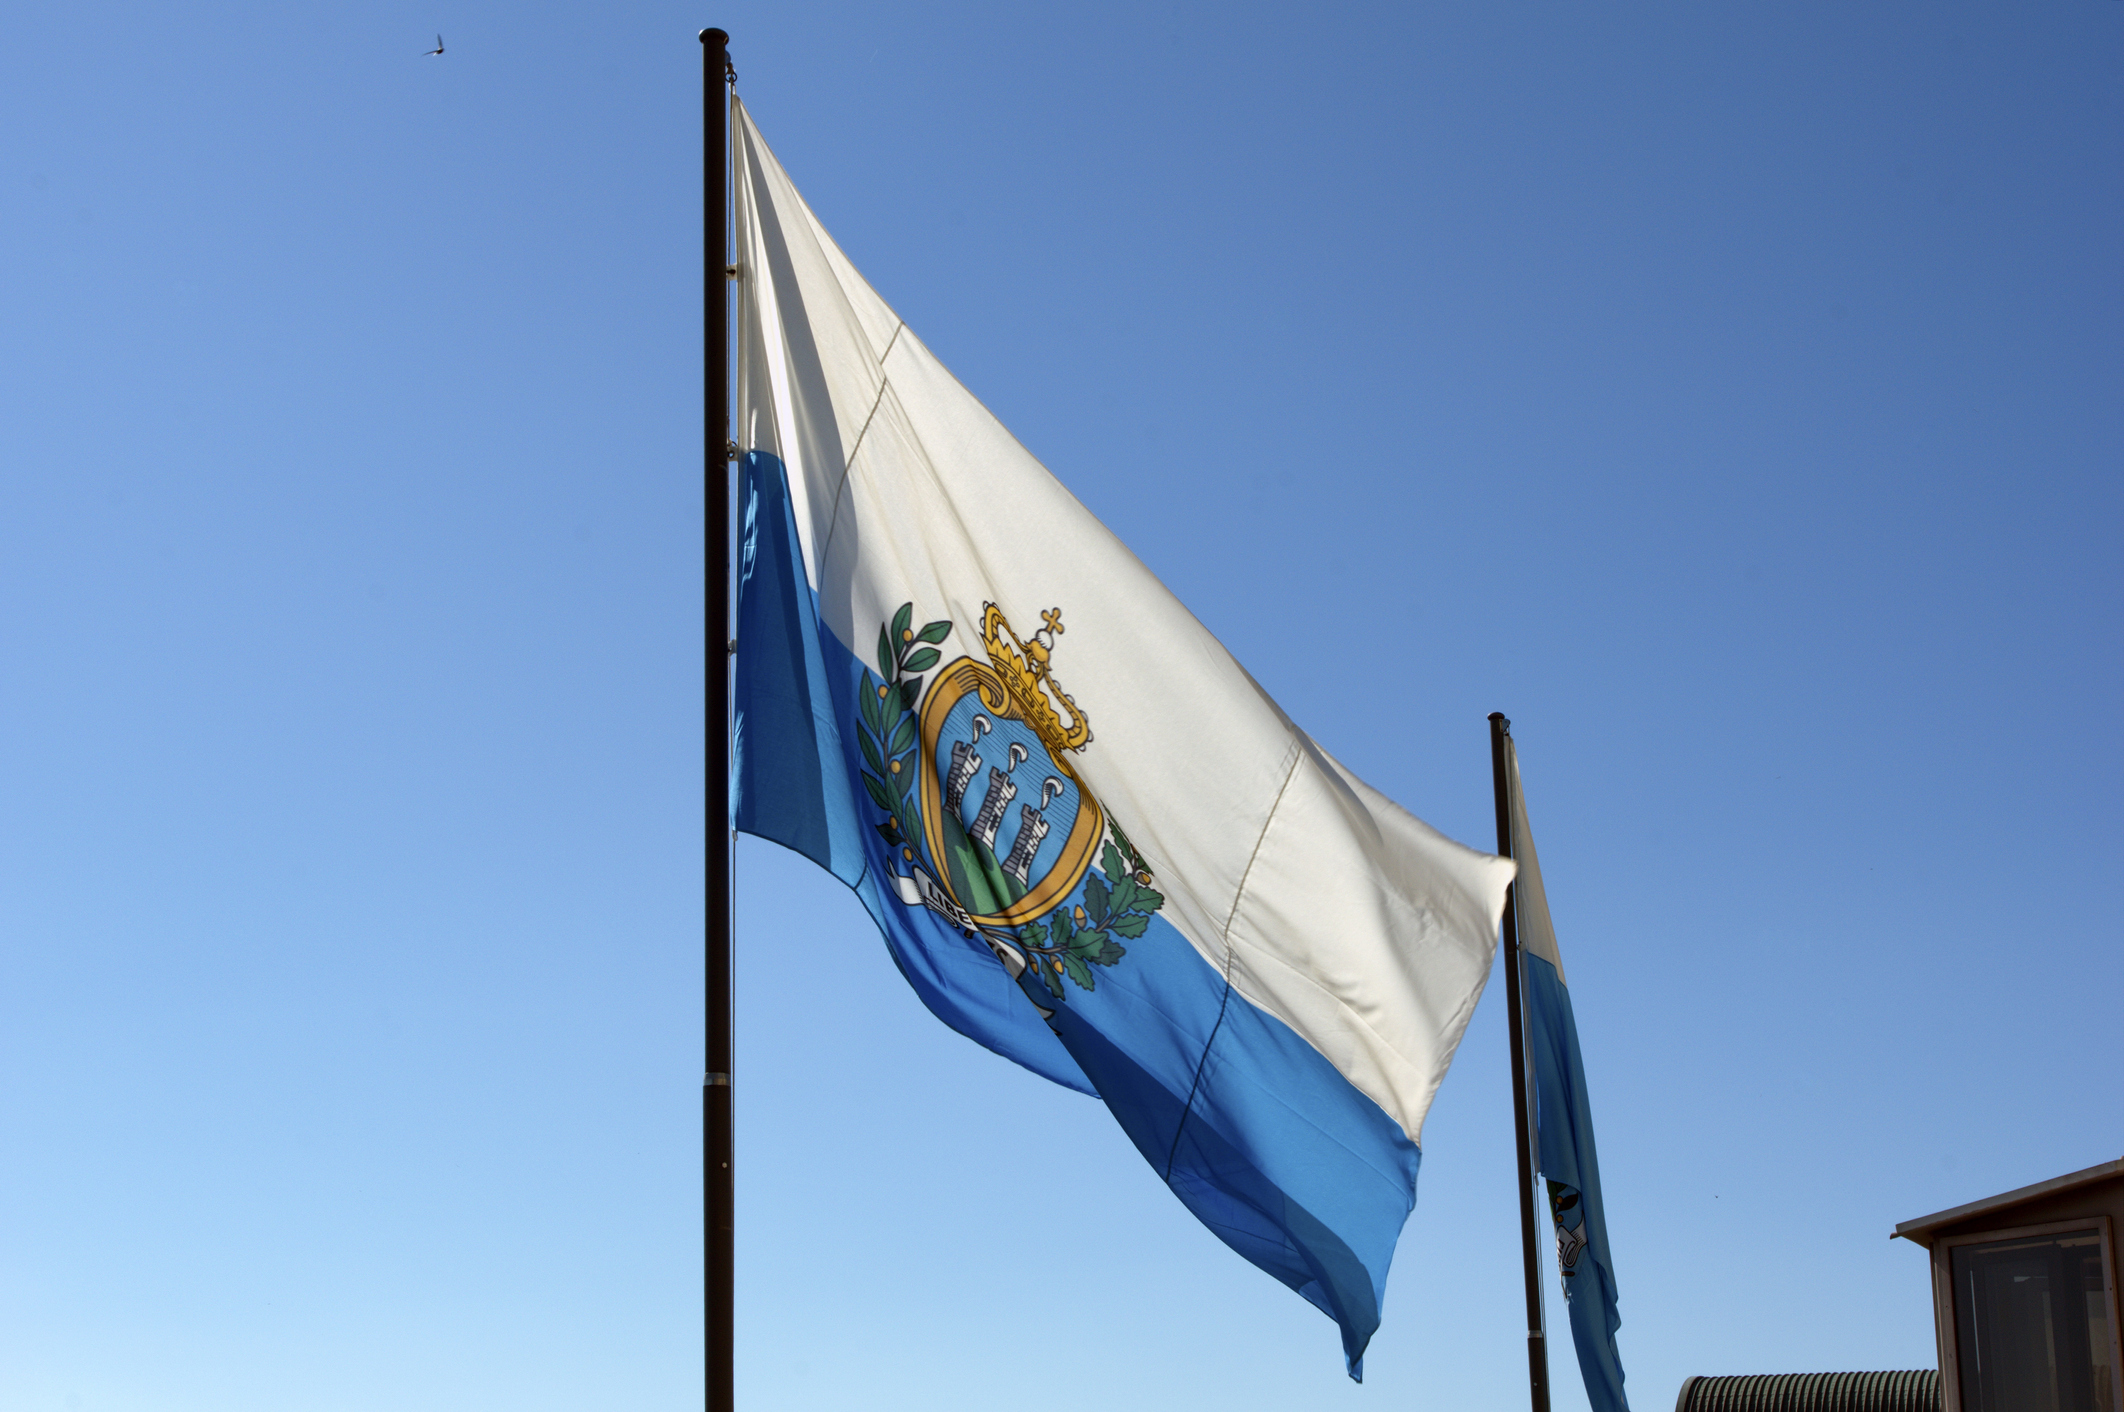 Low Angle View Of Flags Against Clear Blue Sky